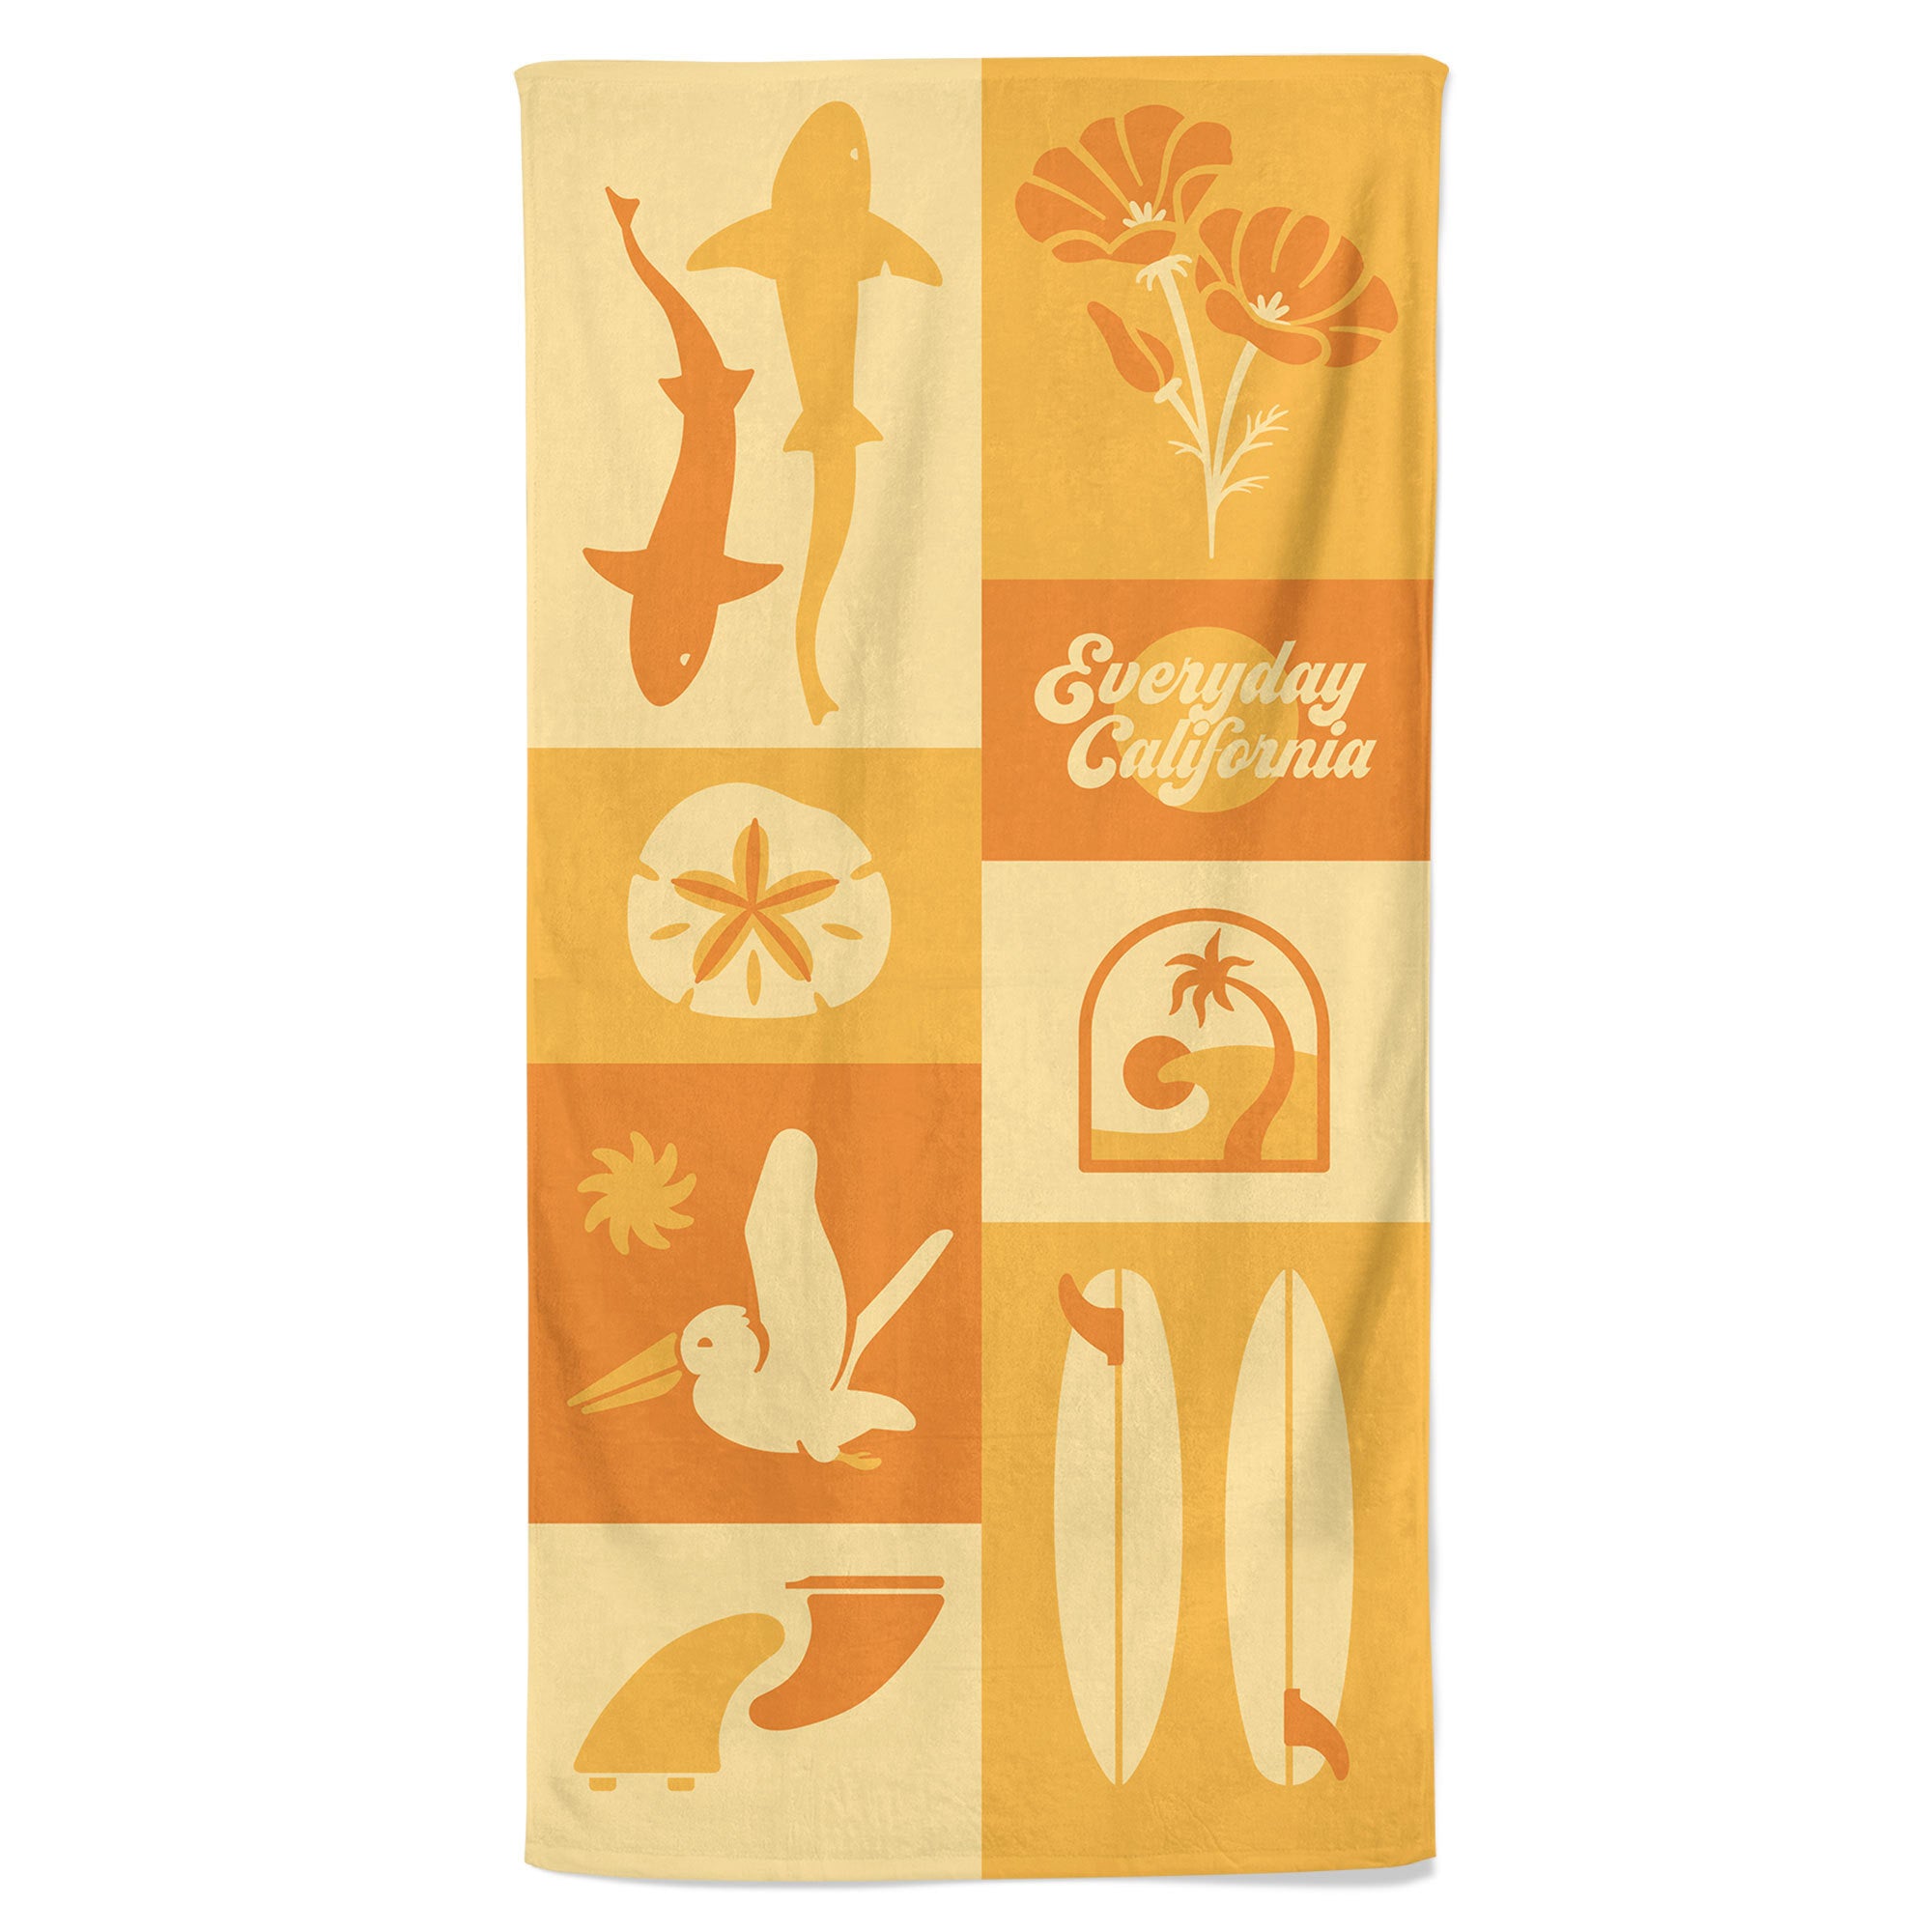 Photo of a beach towel featuring leopard sharks, surfboards, palm trees, california poppies, surf fins, and a cormorant bird design on it.